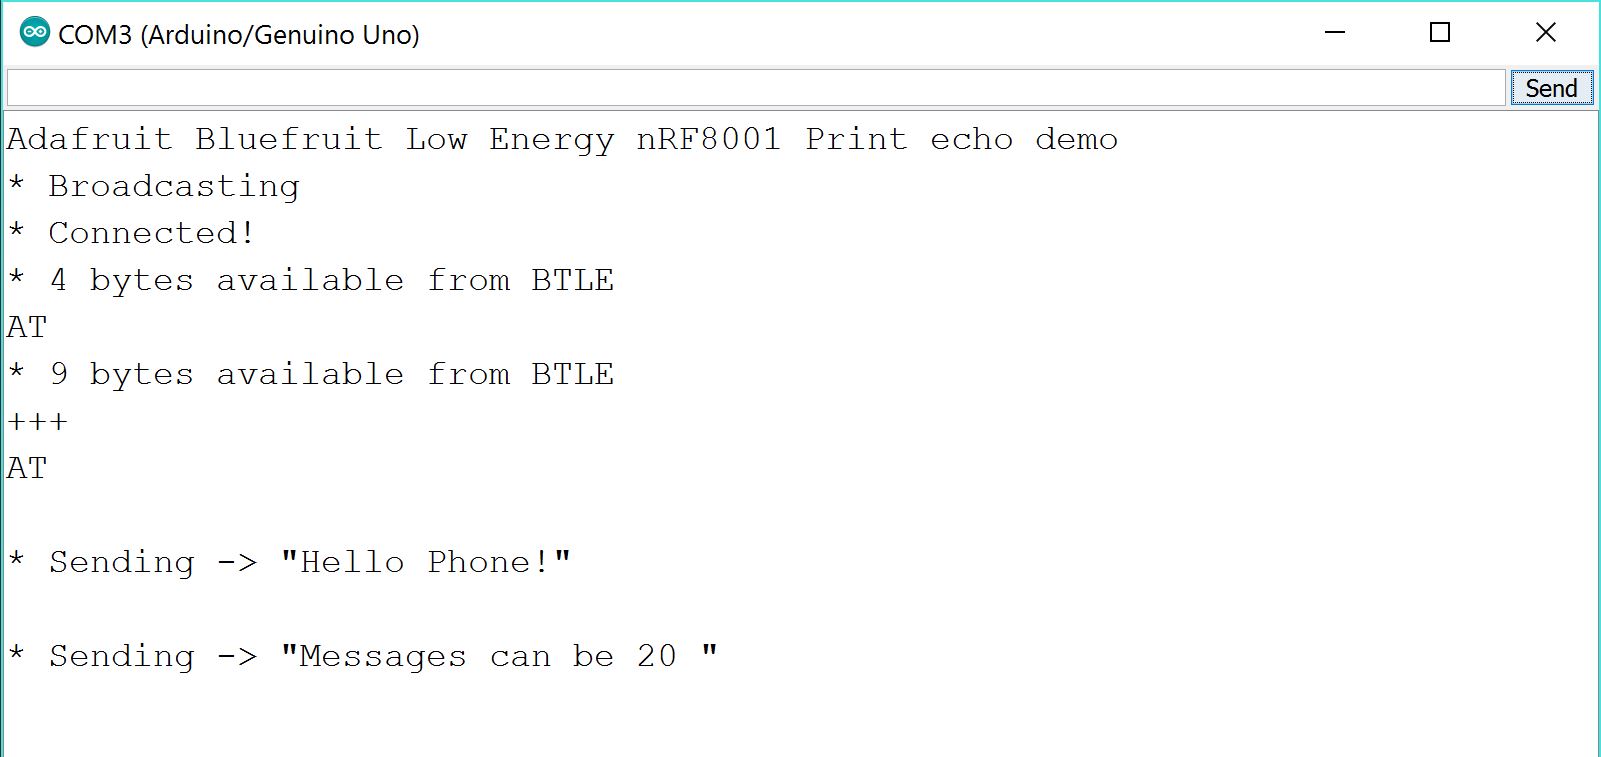 Snip from the Arduino Serial Monitor during transmission testing